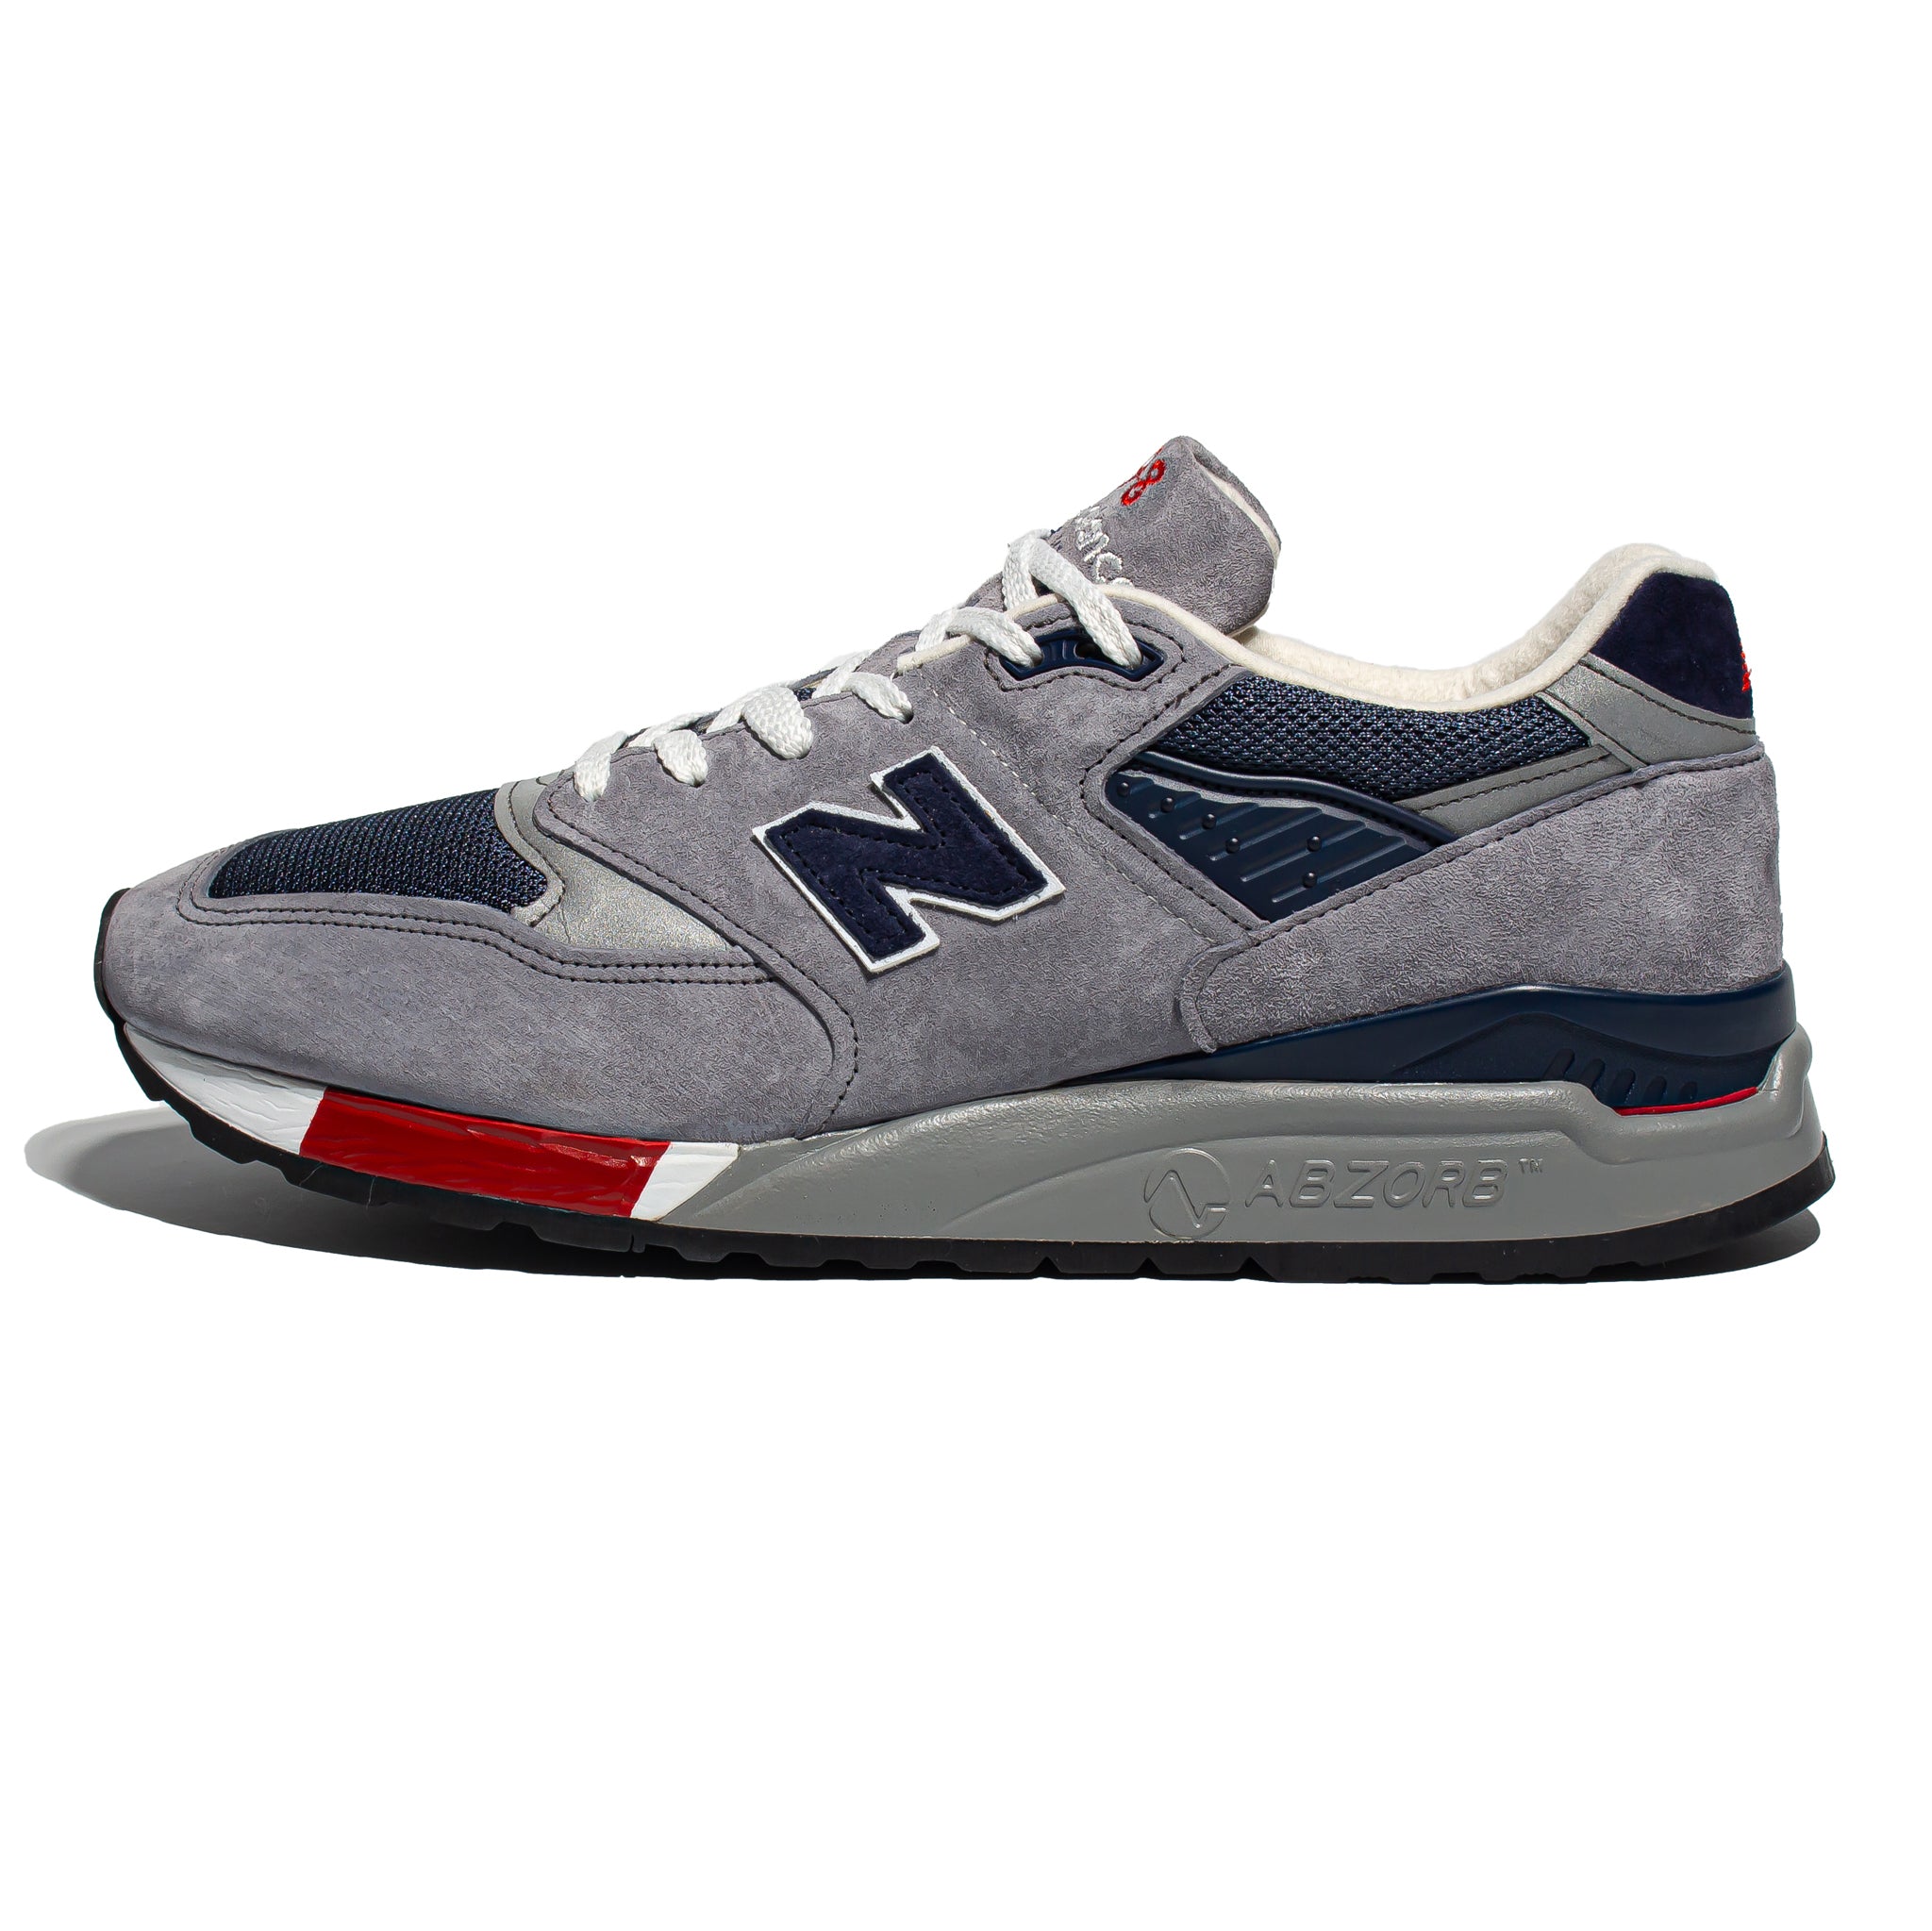 New Balance 'Made in USA' M998GNR